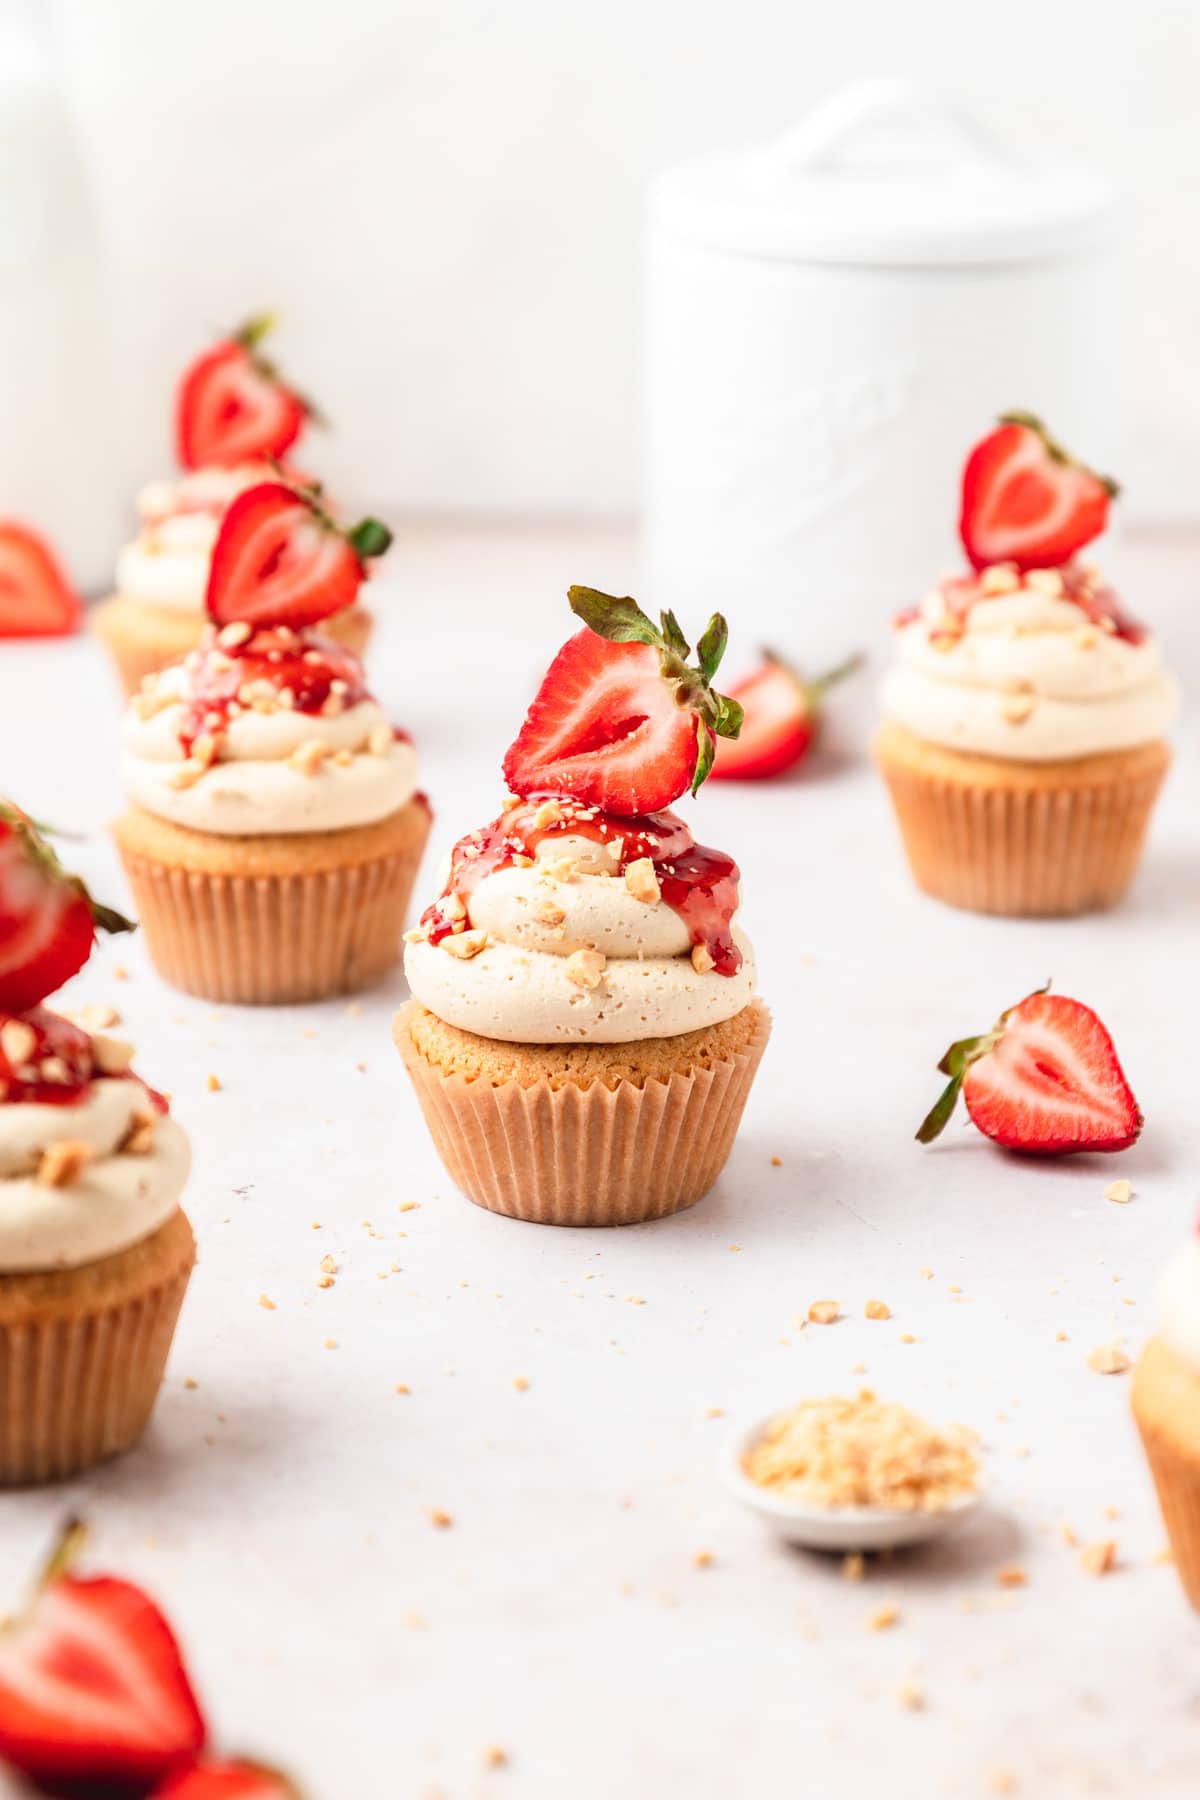 peanut butter and jelly cupcakes with strawberries on top.